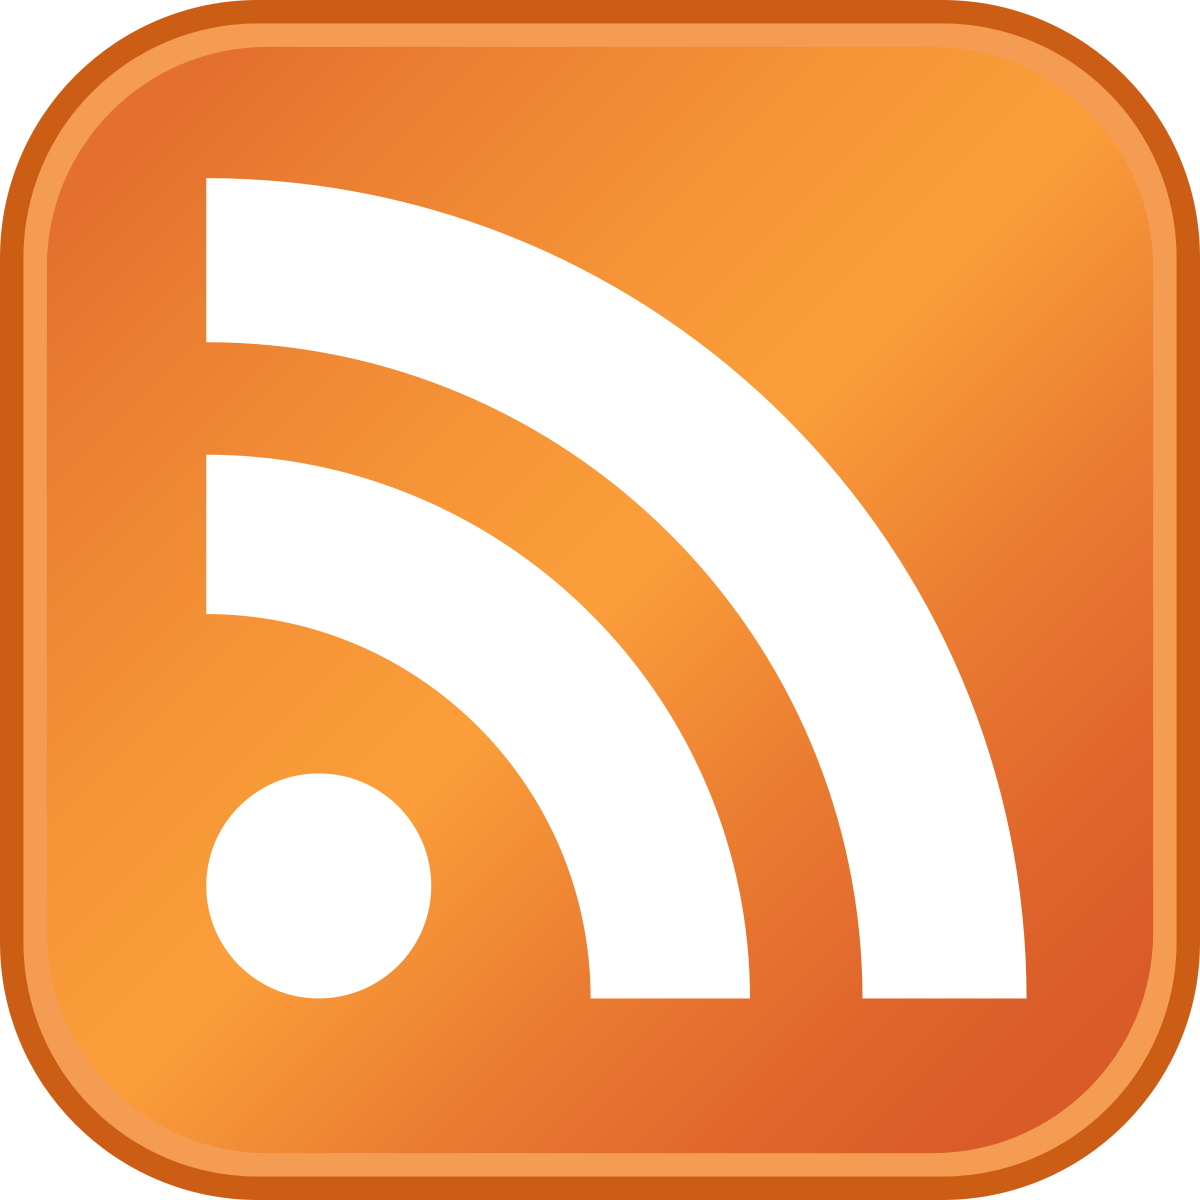 RSS Feeds now at BLCOMP Inc.